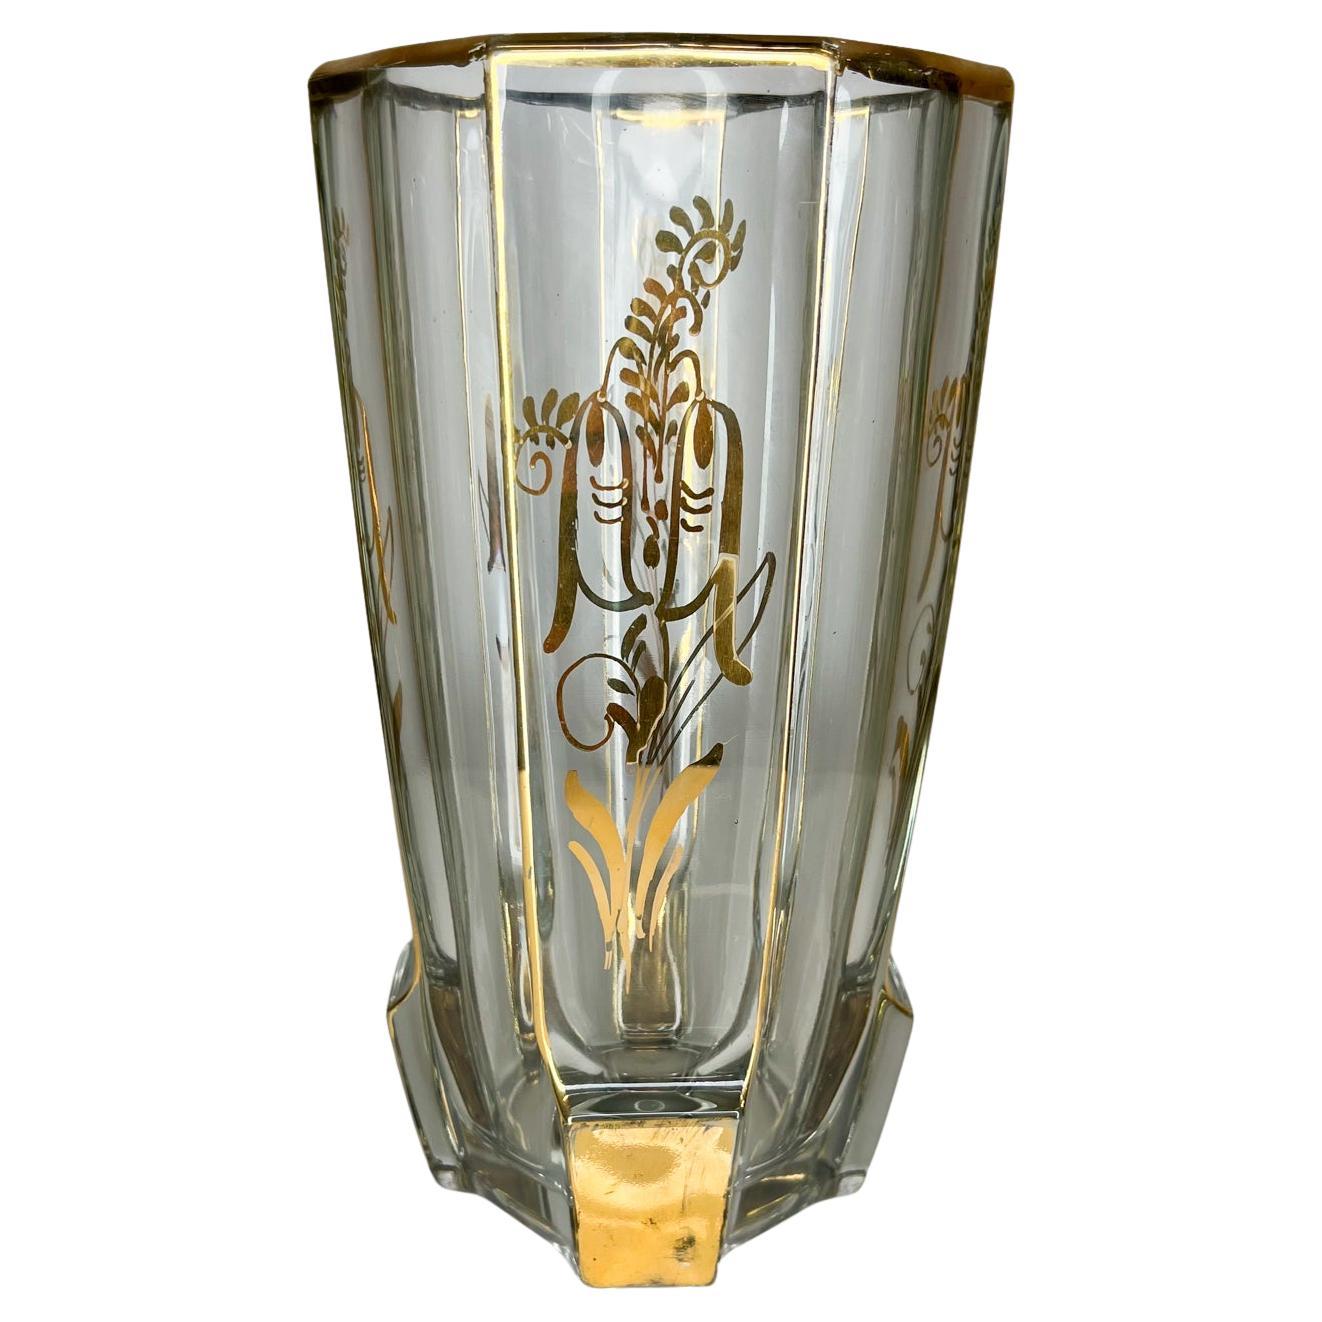 1960s Modern Hollywood Regency Stunning Glass Vase with Gold Painted Motif